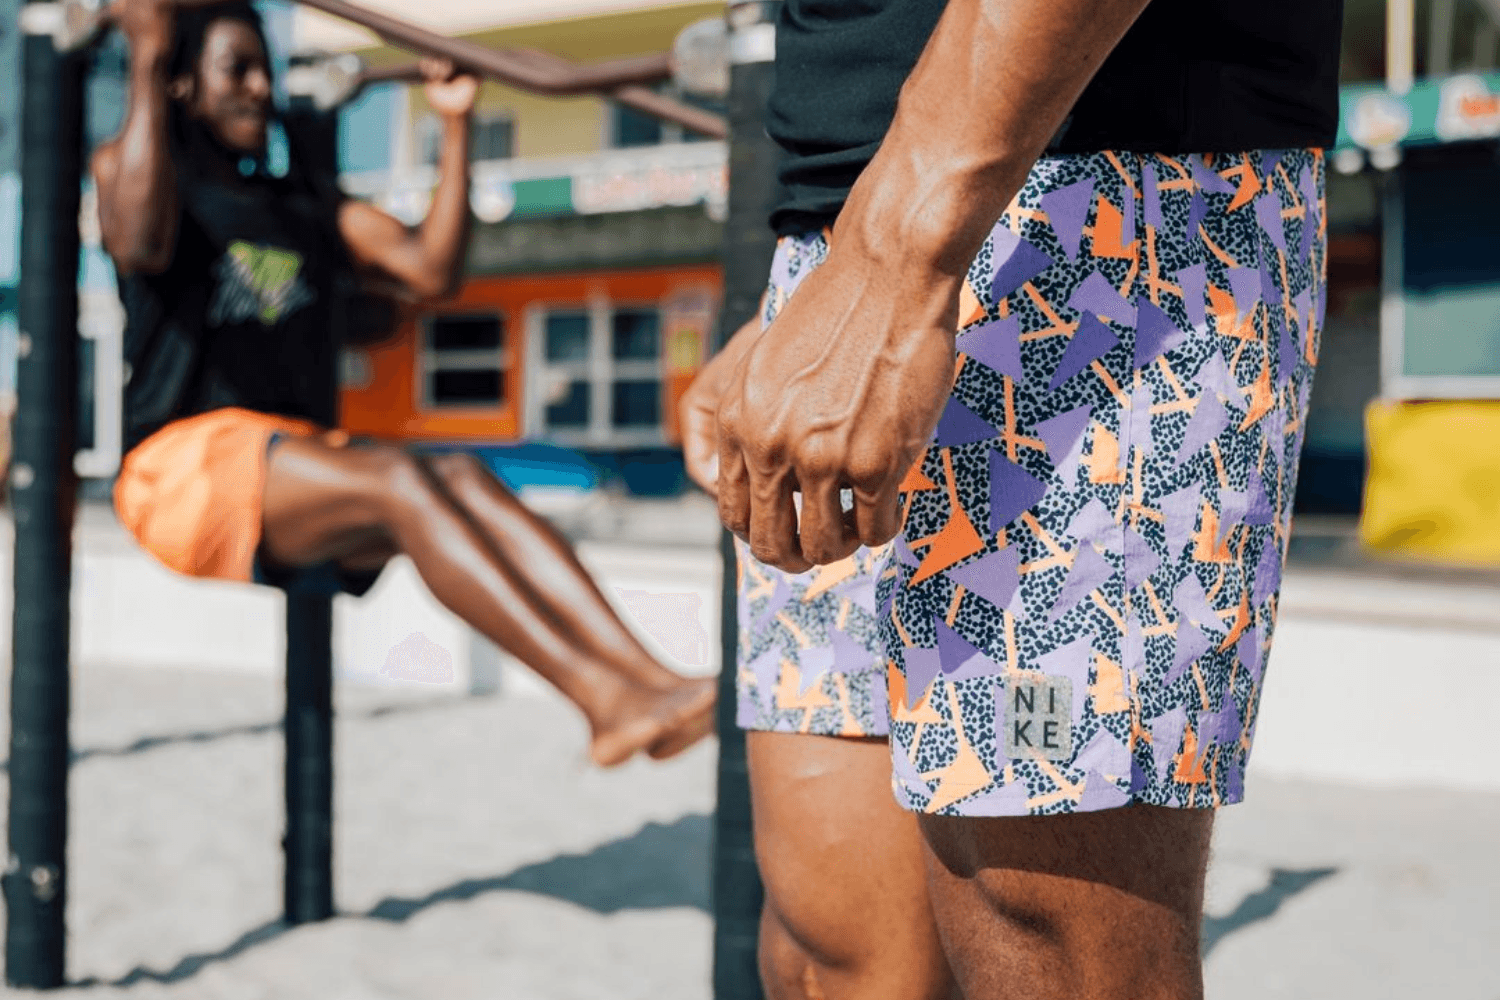 Our favourite items for the summer at Foot Locker